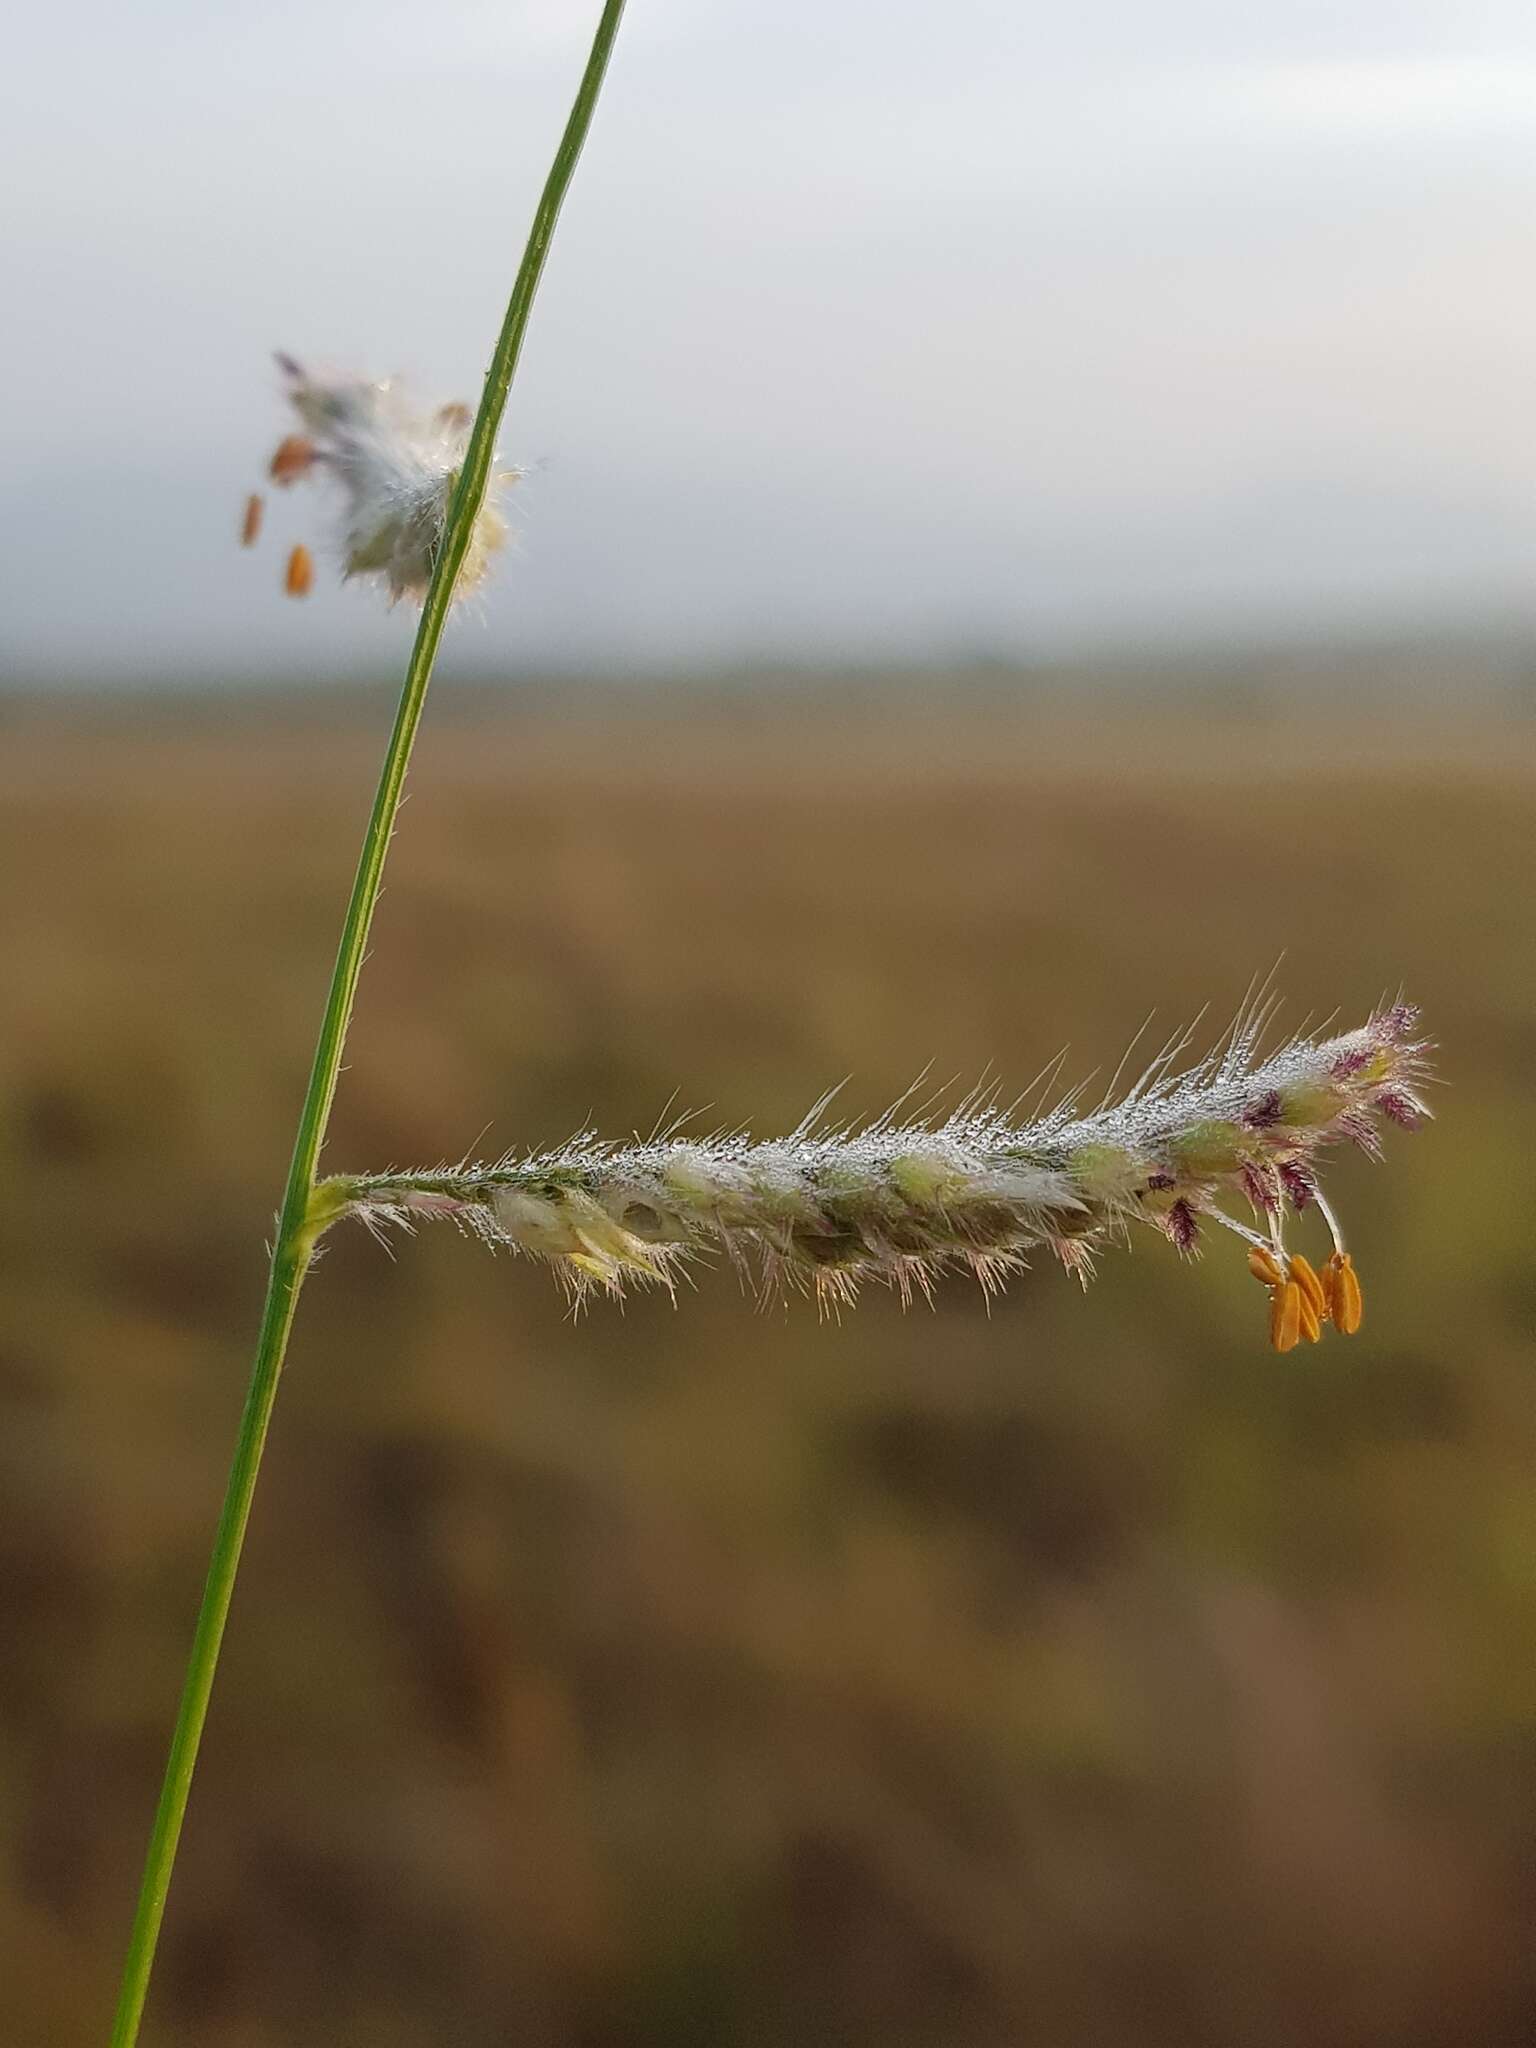 Image of Black-footed signal grass